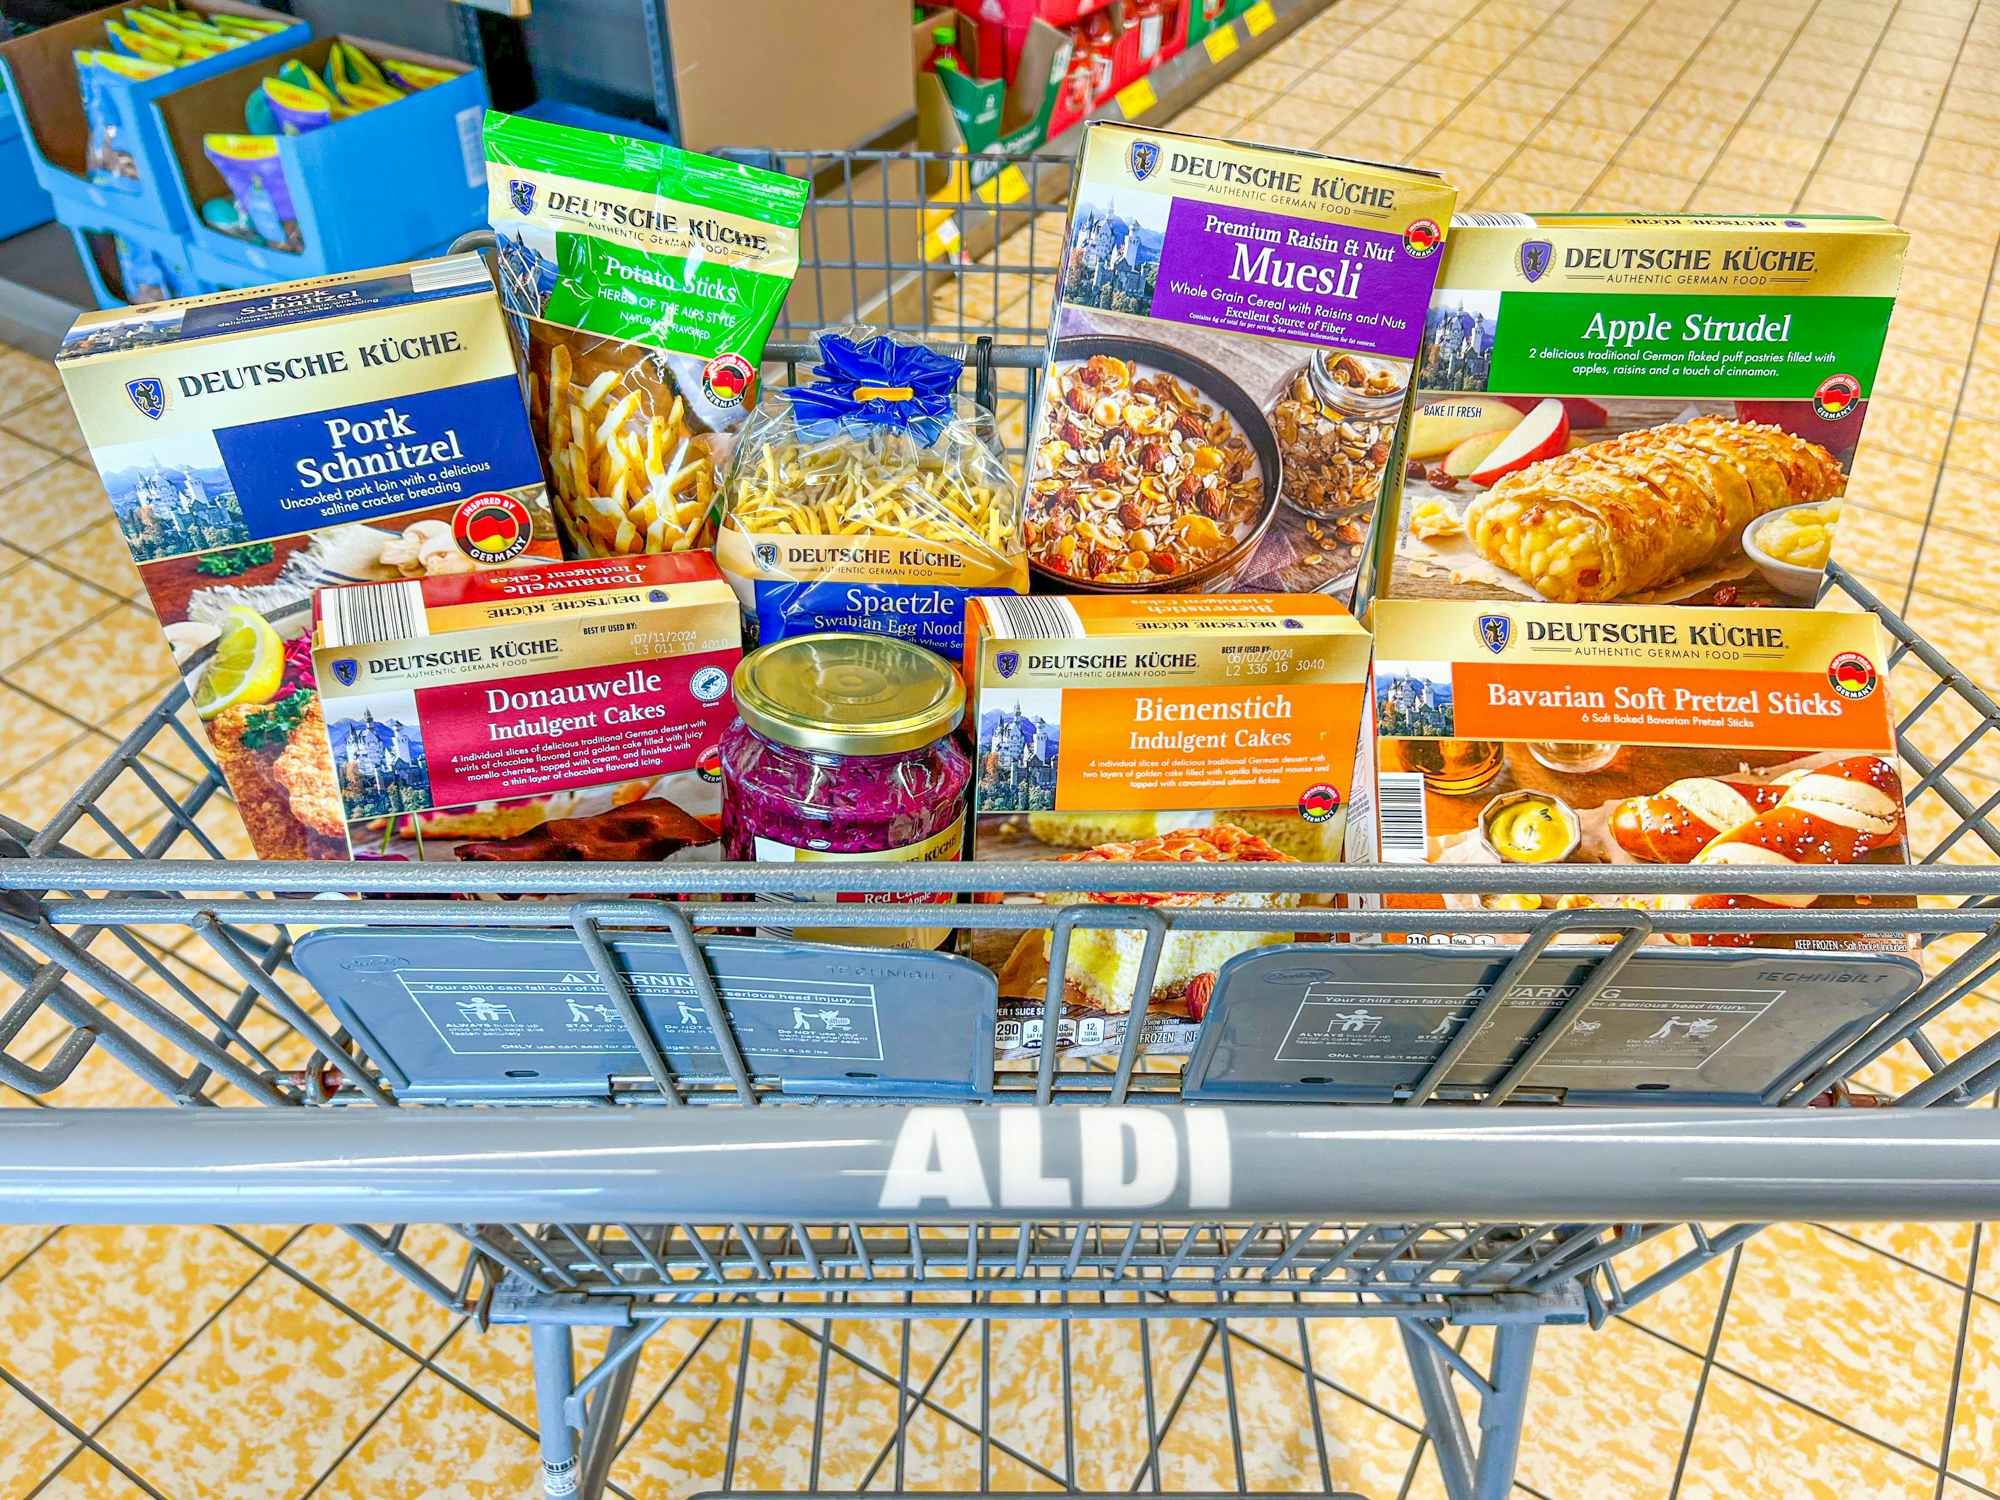 An Aldi cart filled with German Week foods